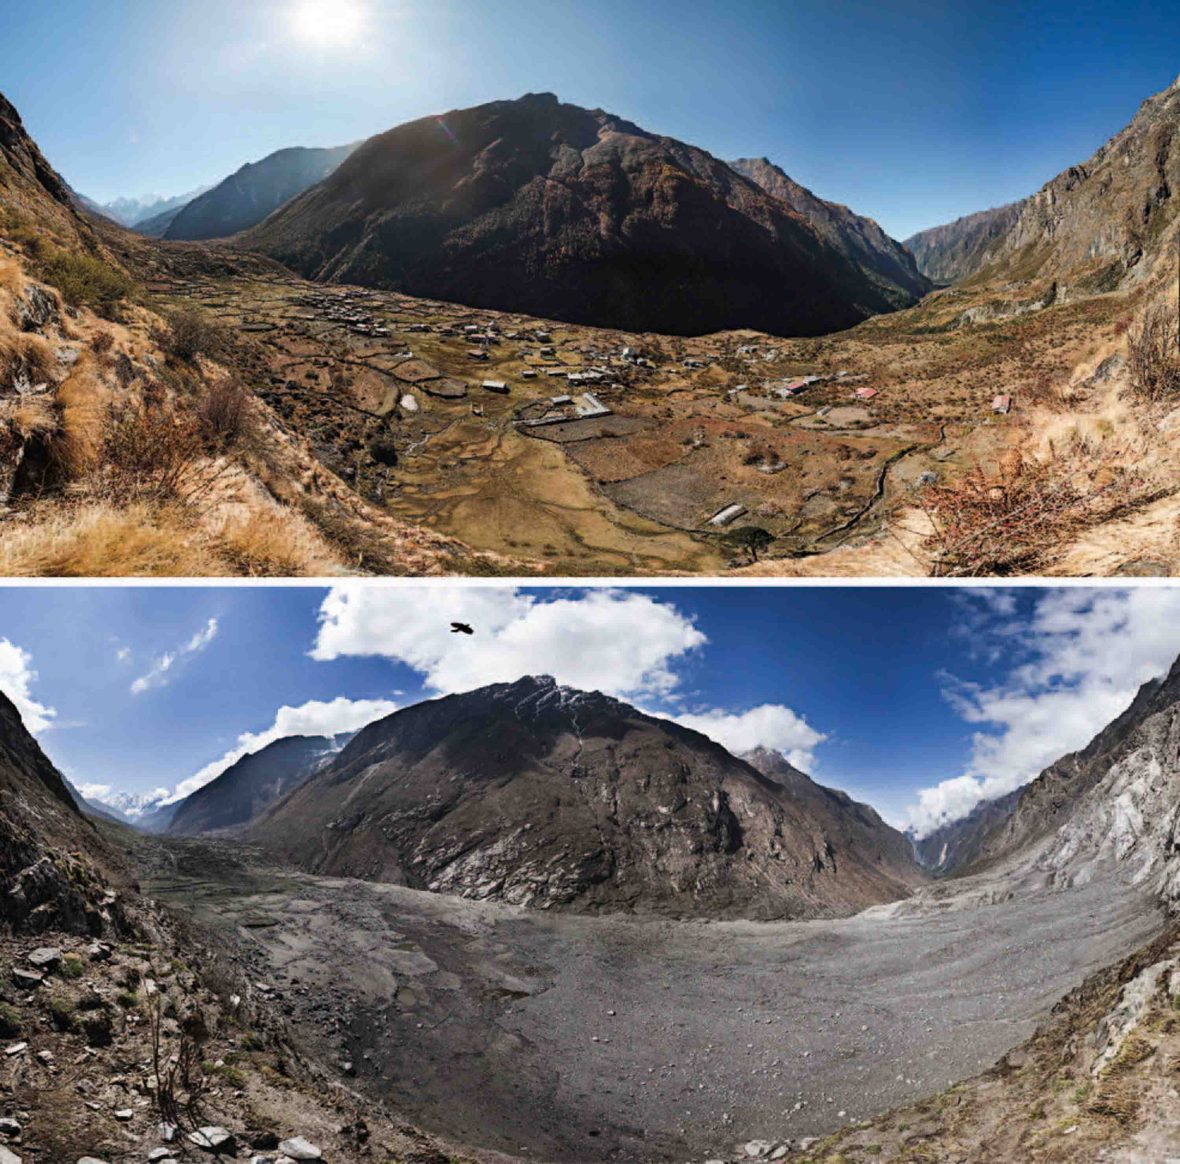 Before and after photos of Langtang valley, showing the destruction caused by the earthquake.